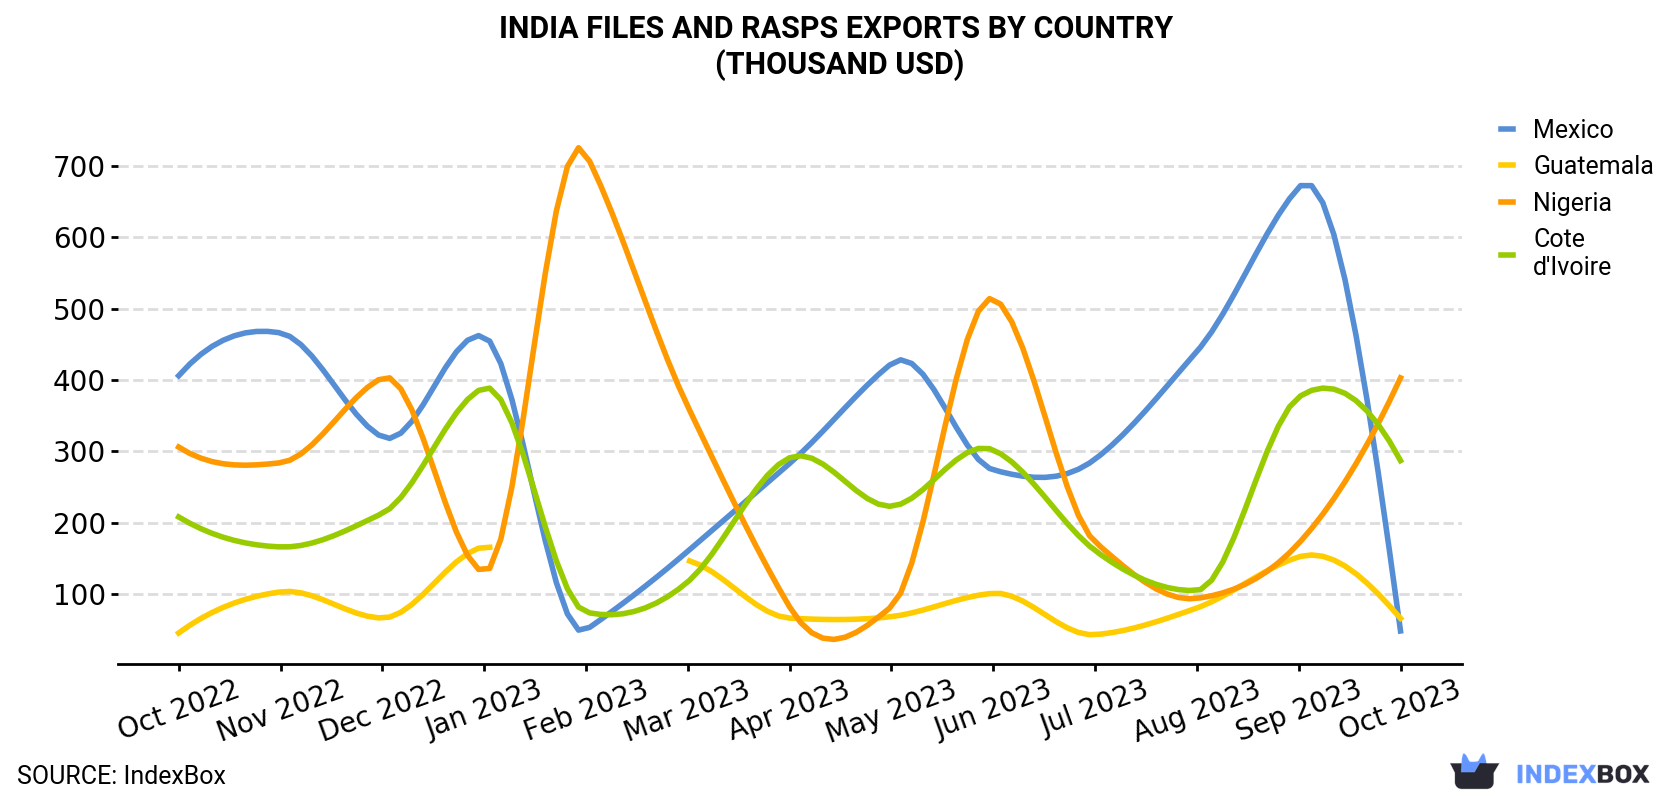 India Files And Rasps Exports By Country (Thousand USD)